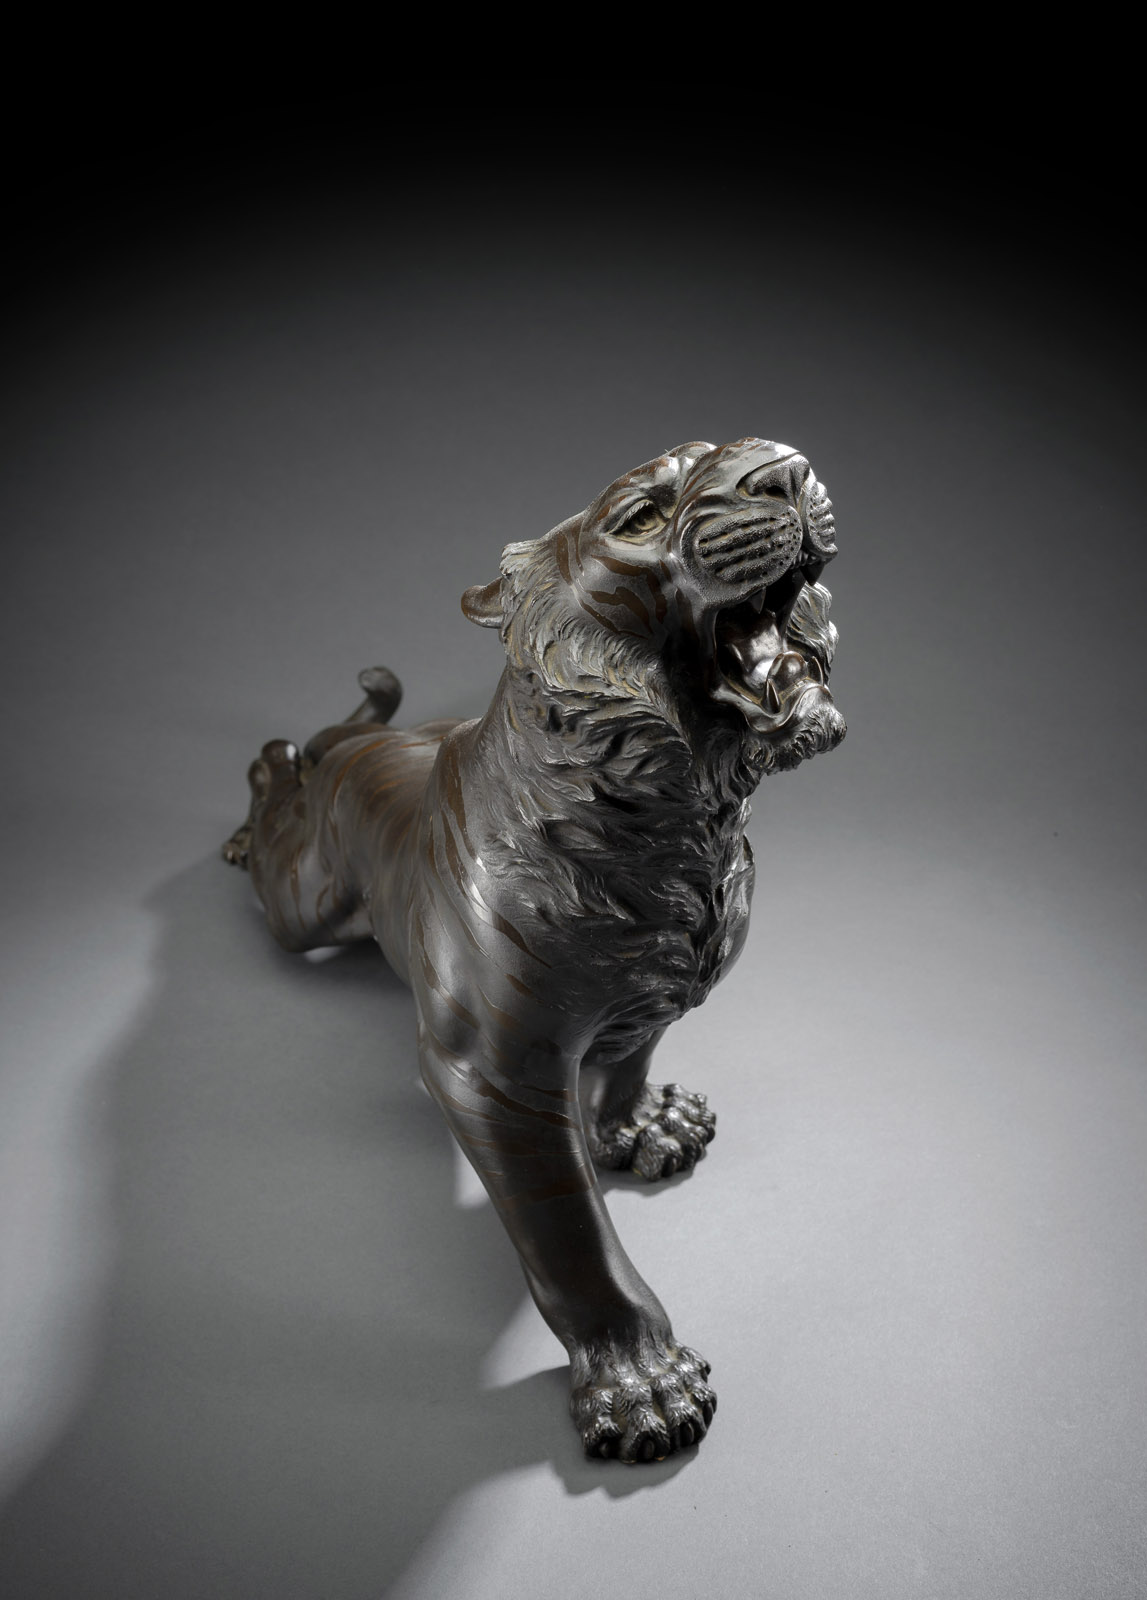 A CAST BRONZE MODEL OF A CREEPING AND ROARING TIGER - Image 2 of 3